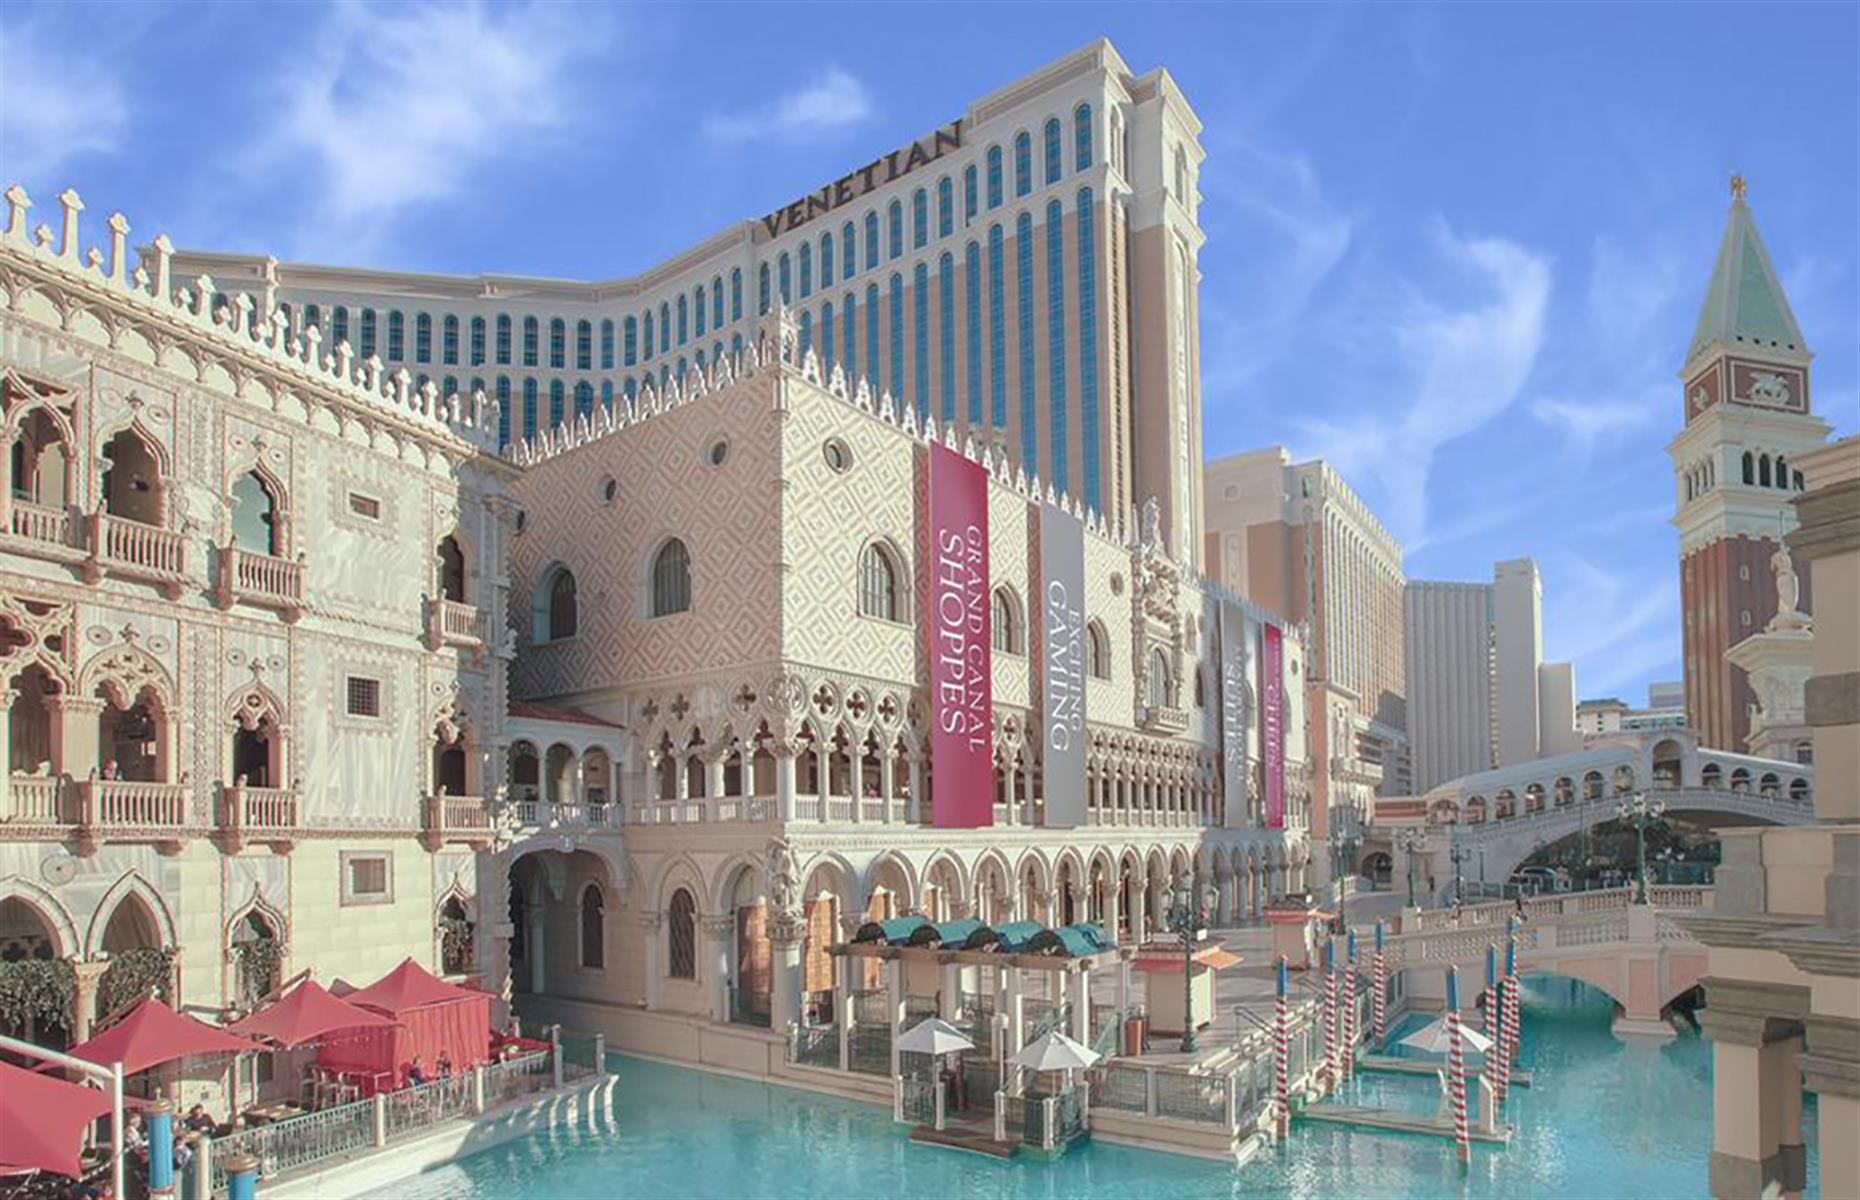 <p>If you've never had the chance to visit the famed Italian merchant city, don't worry because Las Vegas has produced a copy of the city's top attractions at <a href="https://www.booking.com/hotel/us/the-venetian-resort-casino.en-gb.html" rel="nofollow” target=">The Venetian</a>. You'll find everything from the iconic gondolas floating through the canals and the Dodge's Palace to a version of the Rialto Bridge and even the St Mark's Campanile. Inside, opulent corridors are decorated with marble columns and Renaissance-inspired ceiling frescoes. No need to make that trip to Venice after all. </p>